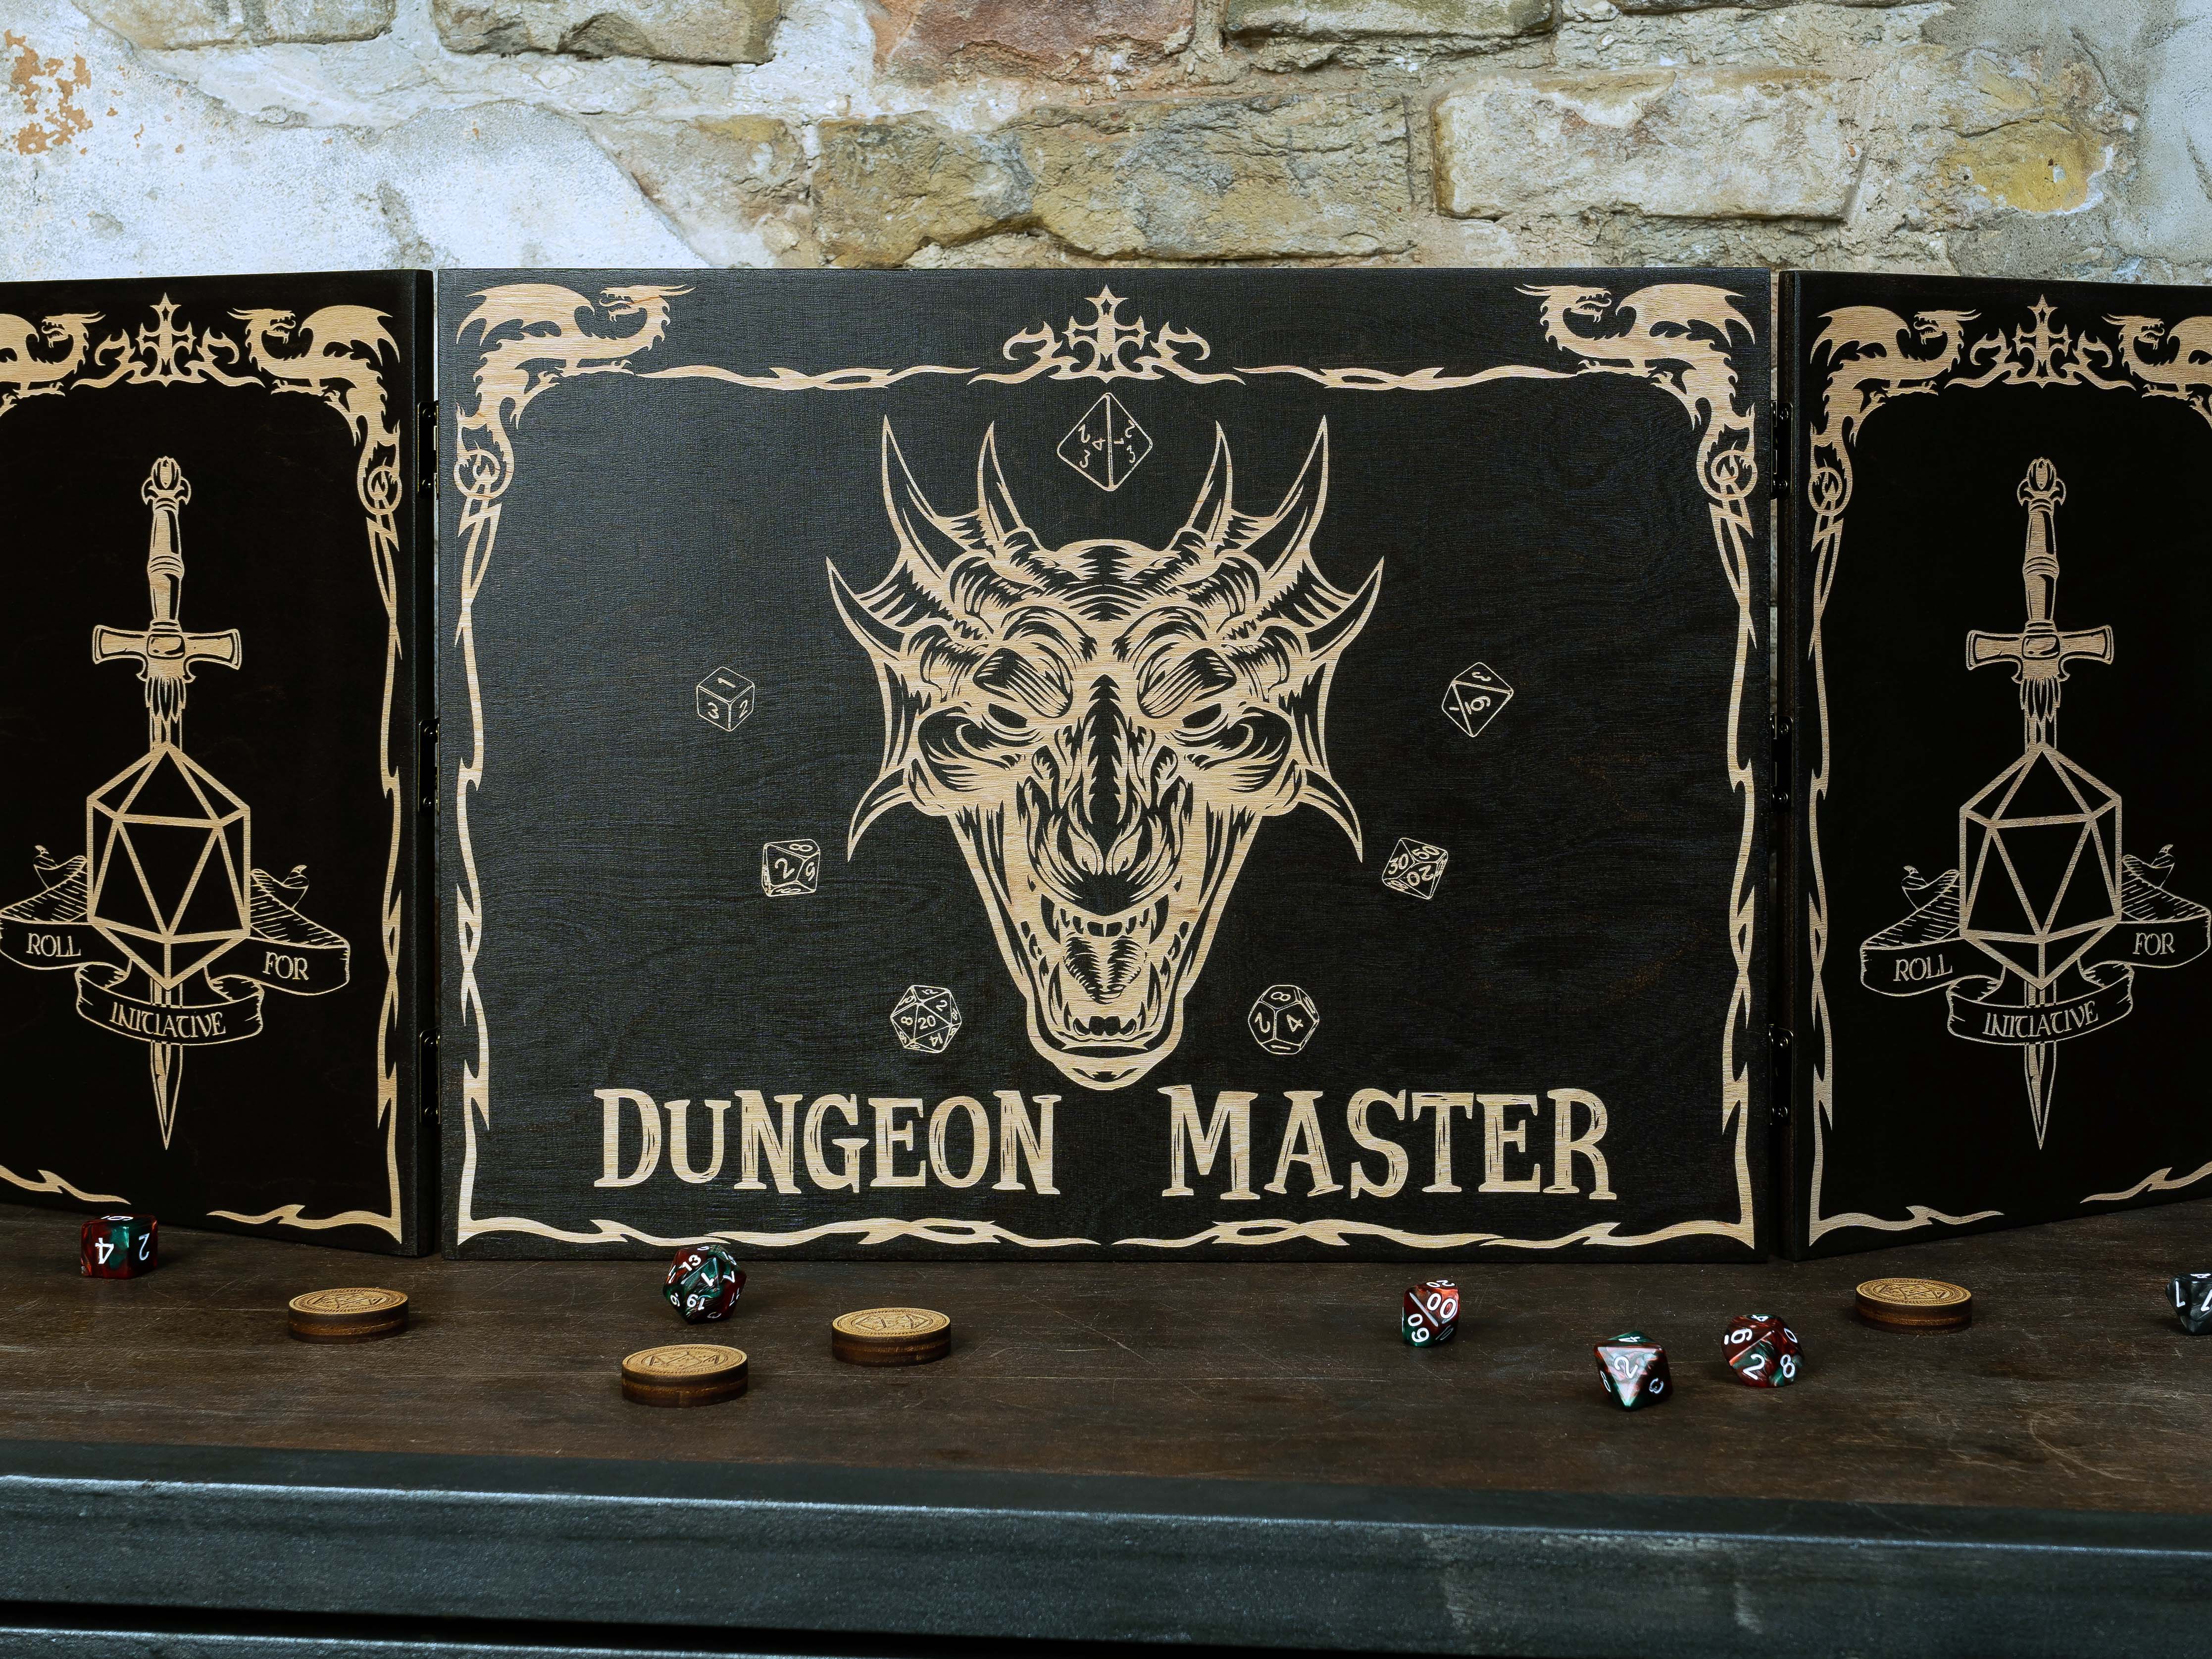 Dungeon Master screen wood Dragon with magnets, Dungeon master screens - GravisCup